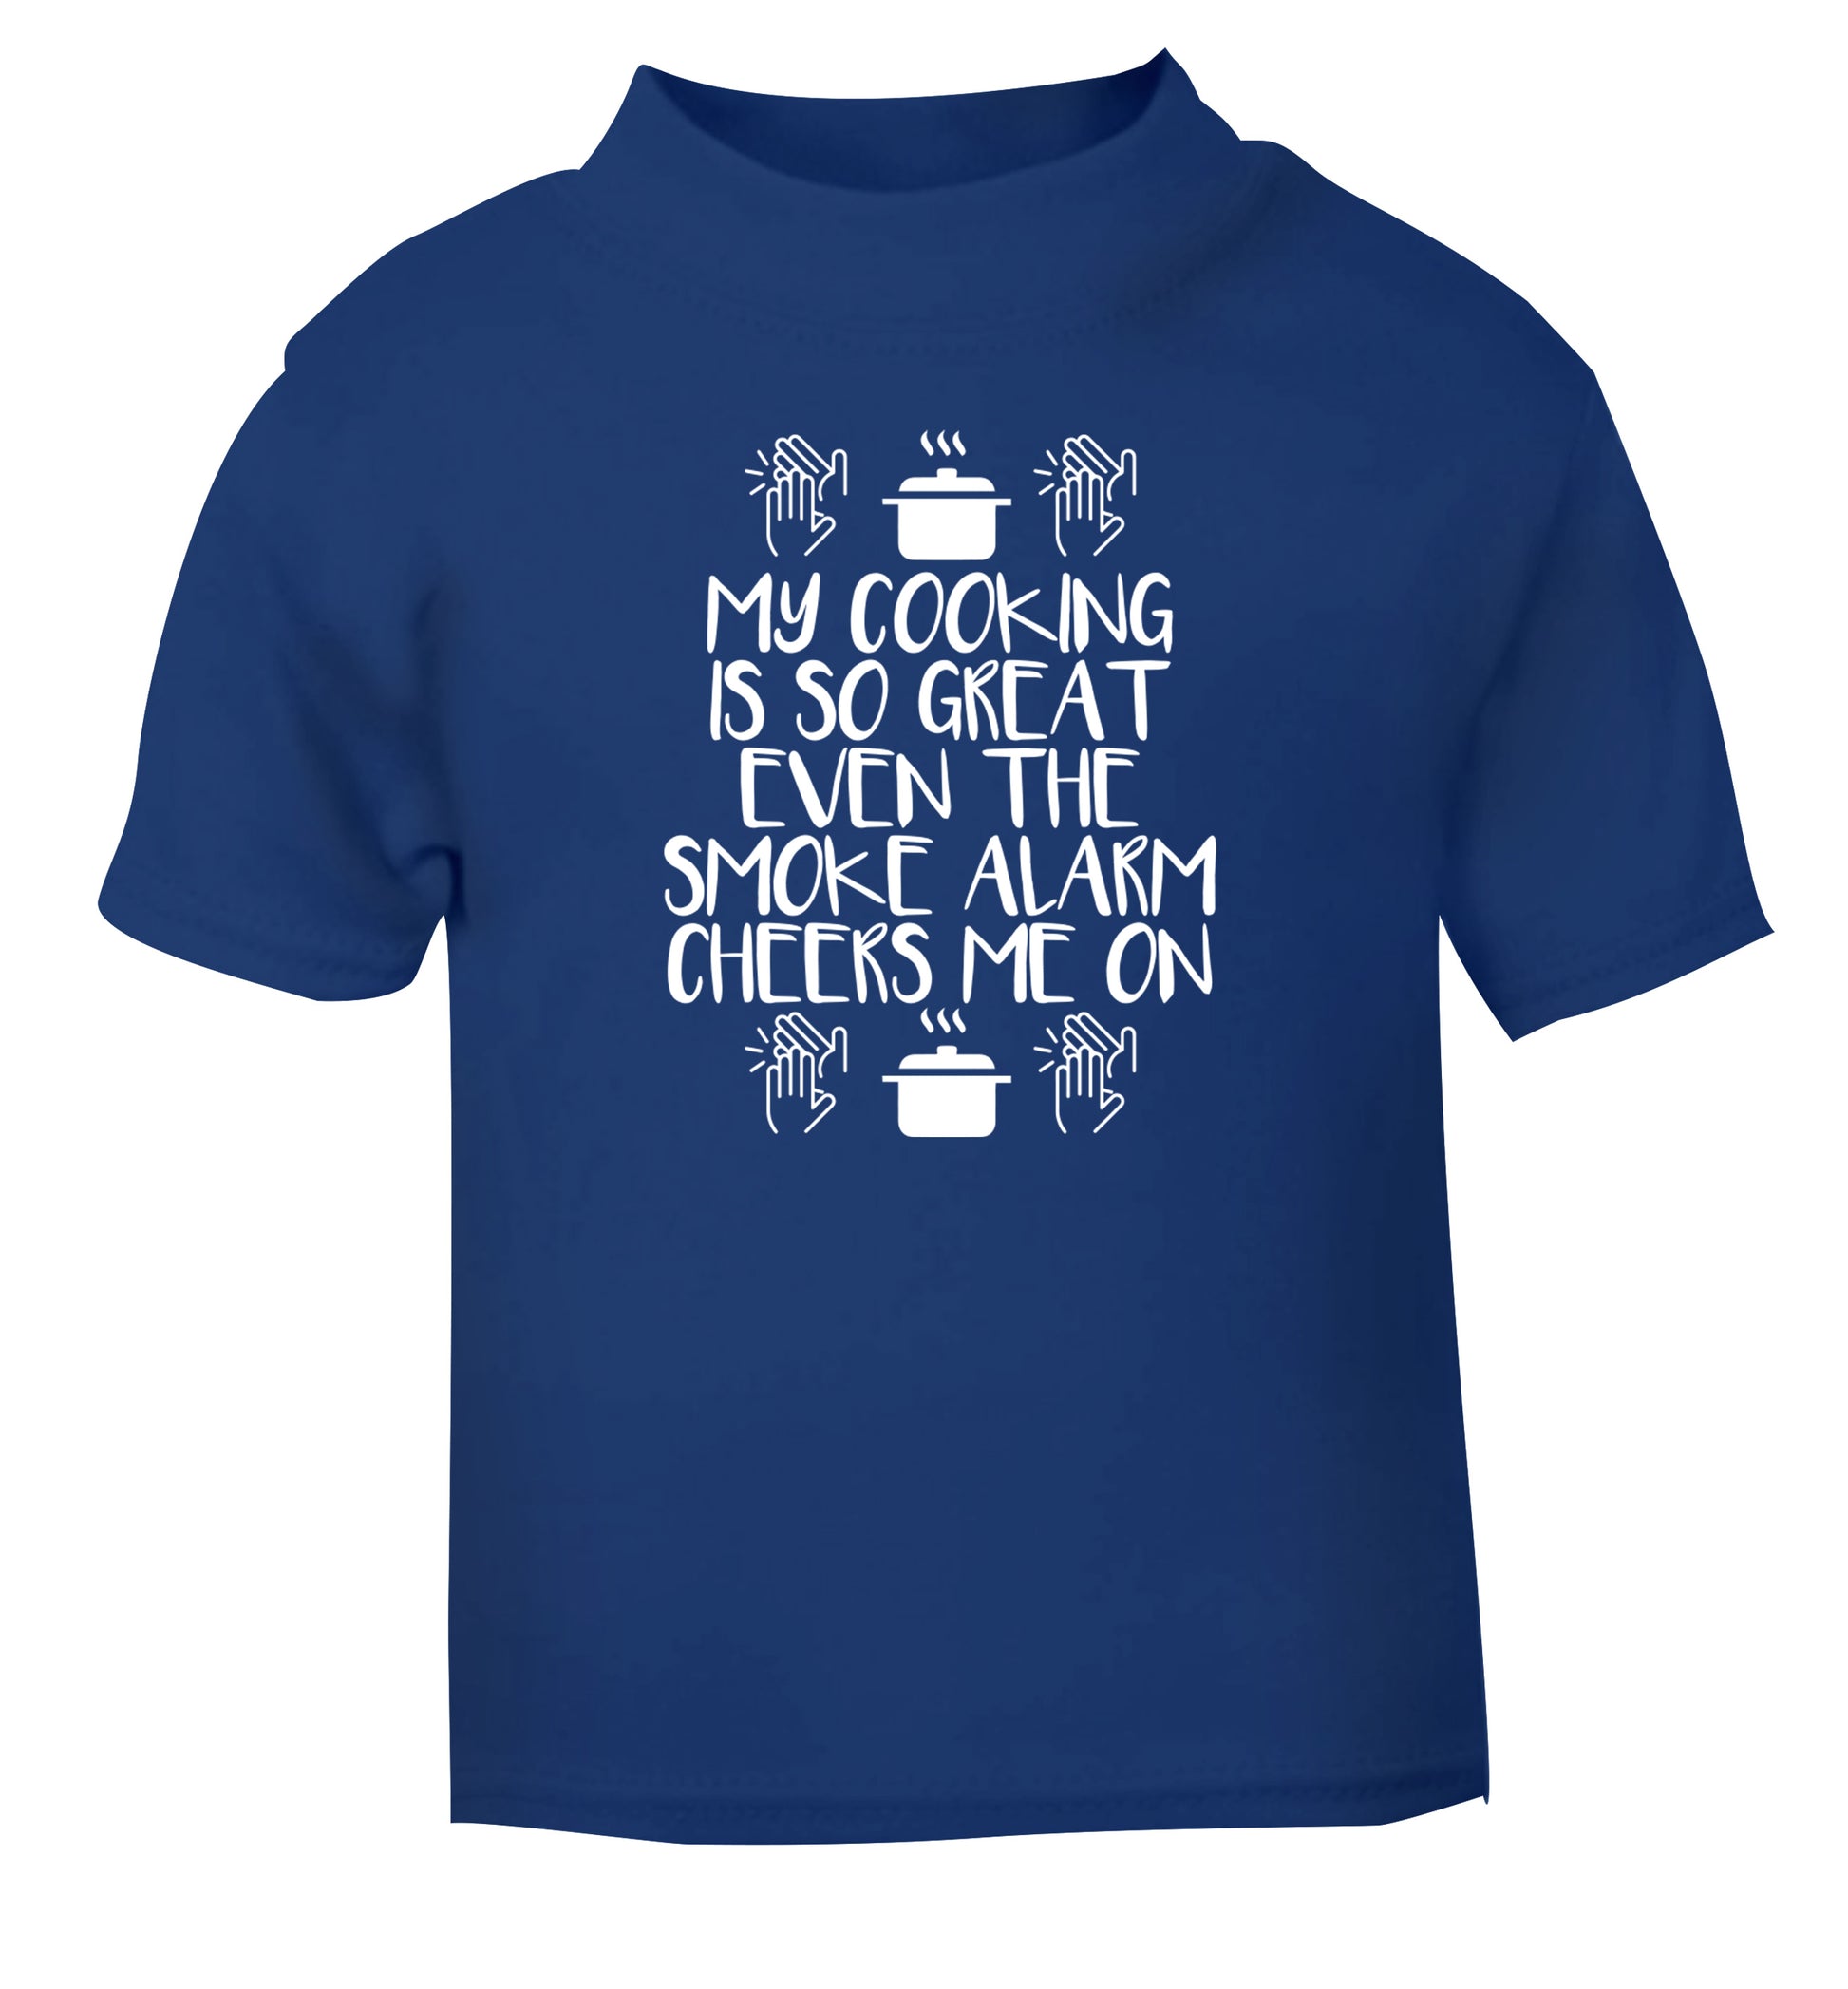 My cooking is so great even the smoke alarm cheers me on! blue Baby Toddler Tshirt 2 Years